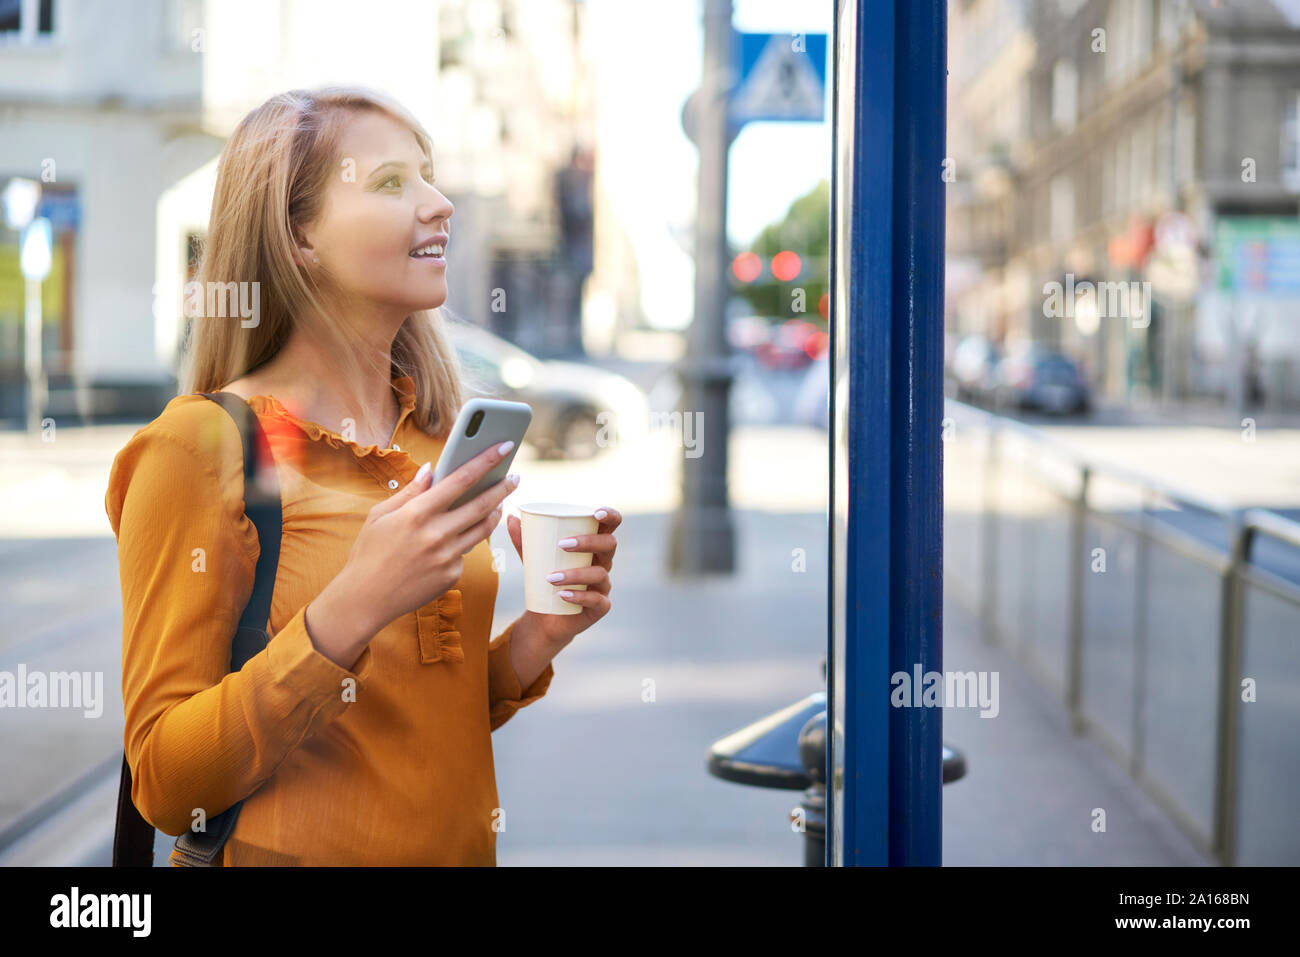 Smiling young woman with smartphone and takeaway coffee checking the schedule at bus stop Stock Photo